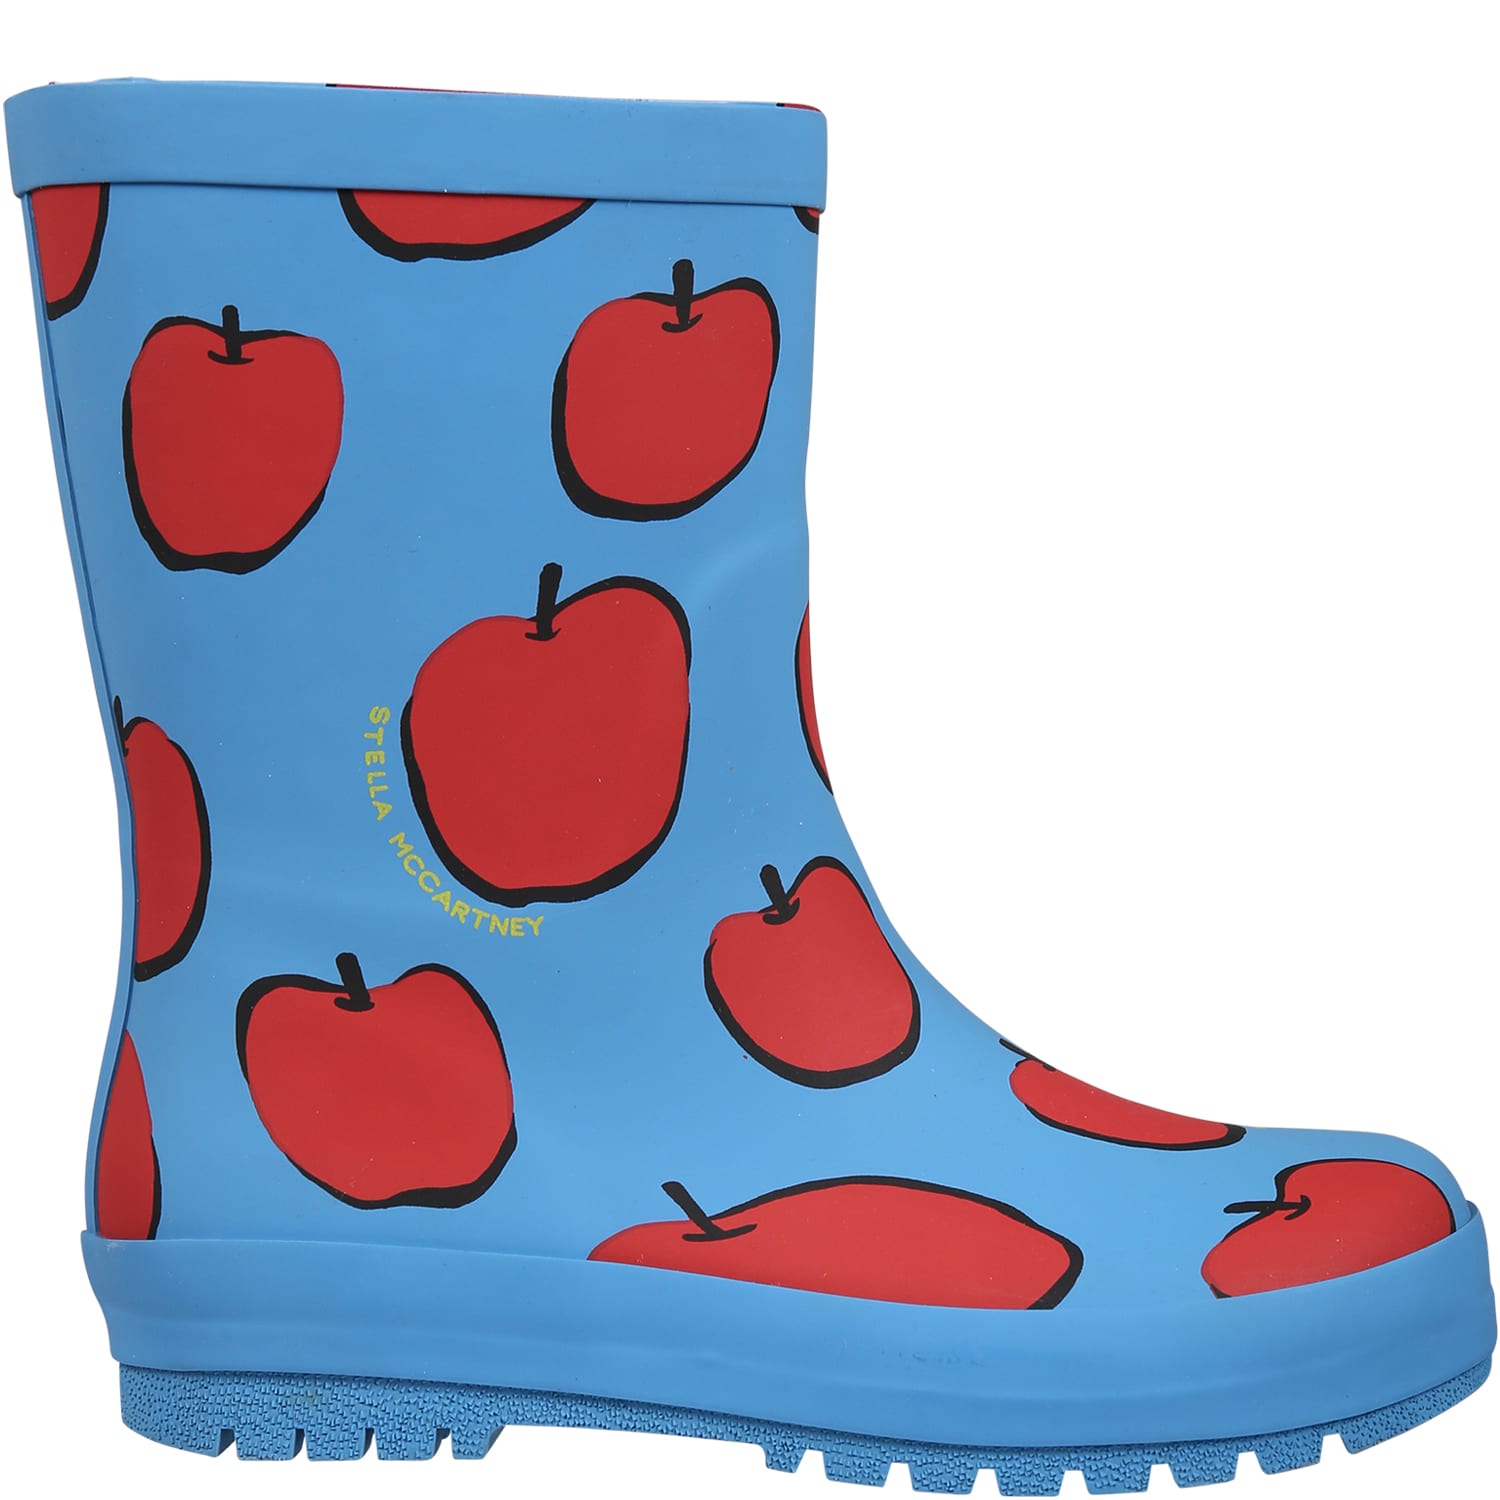 STELLA MCCARTNEY LIGHT BLUE BOOTS FOR GIRL WITH APPLES AND LOGO